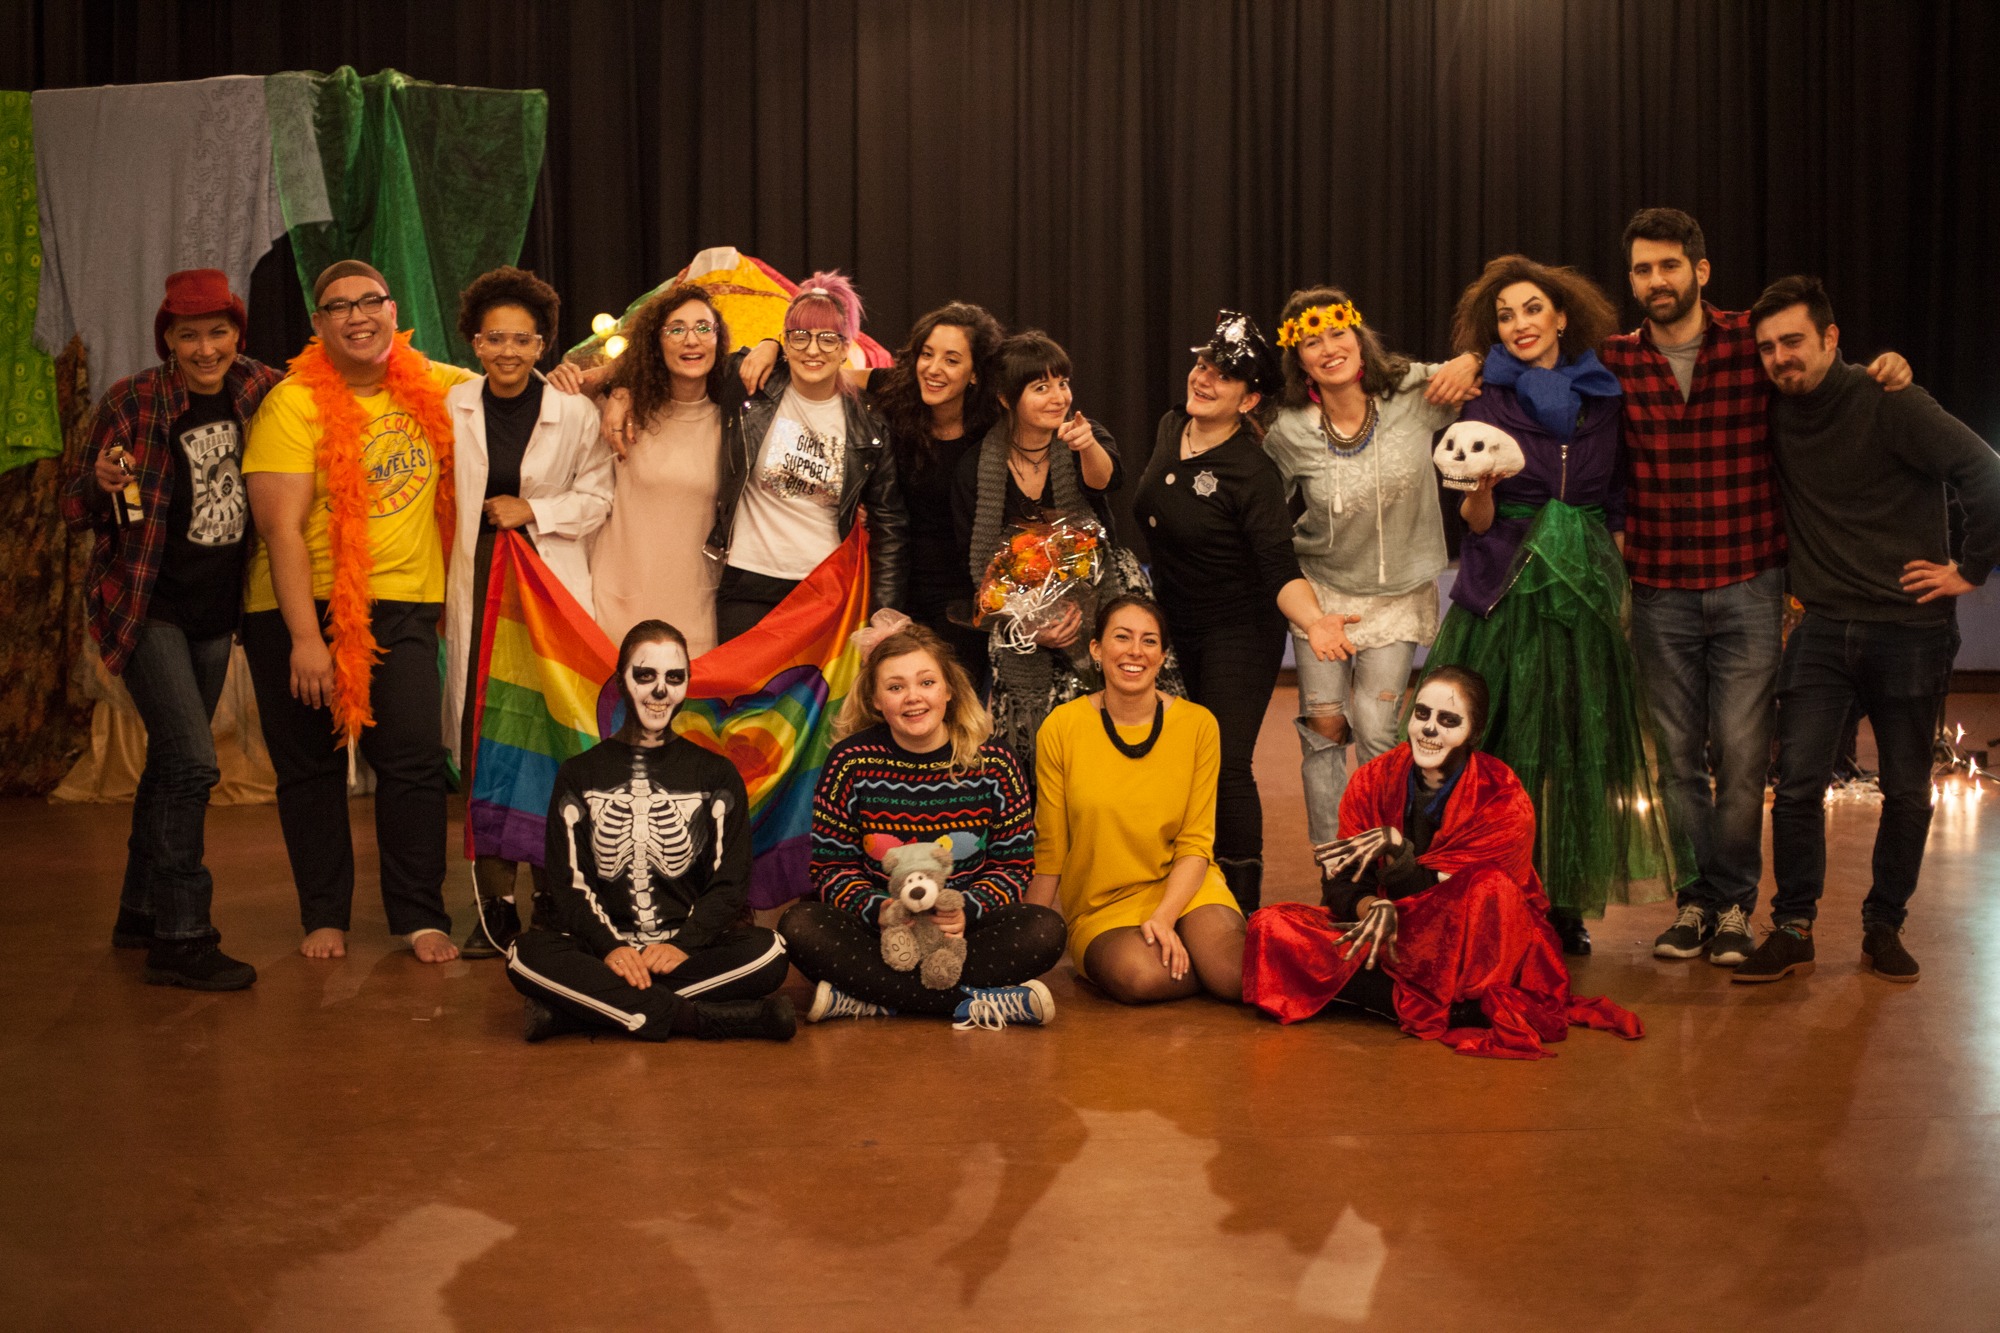 Act Attack group photo. Some people dressed in carnival or halloween costumes